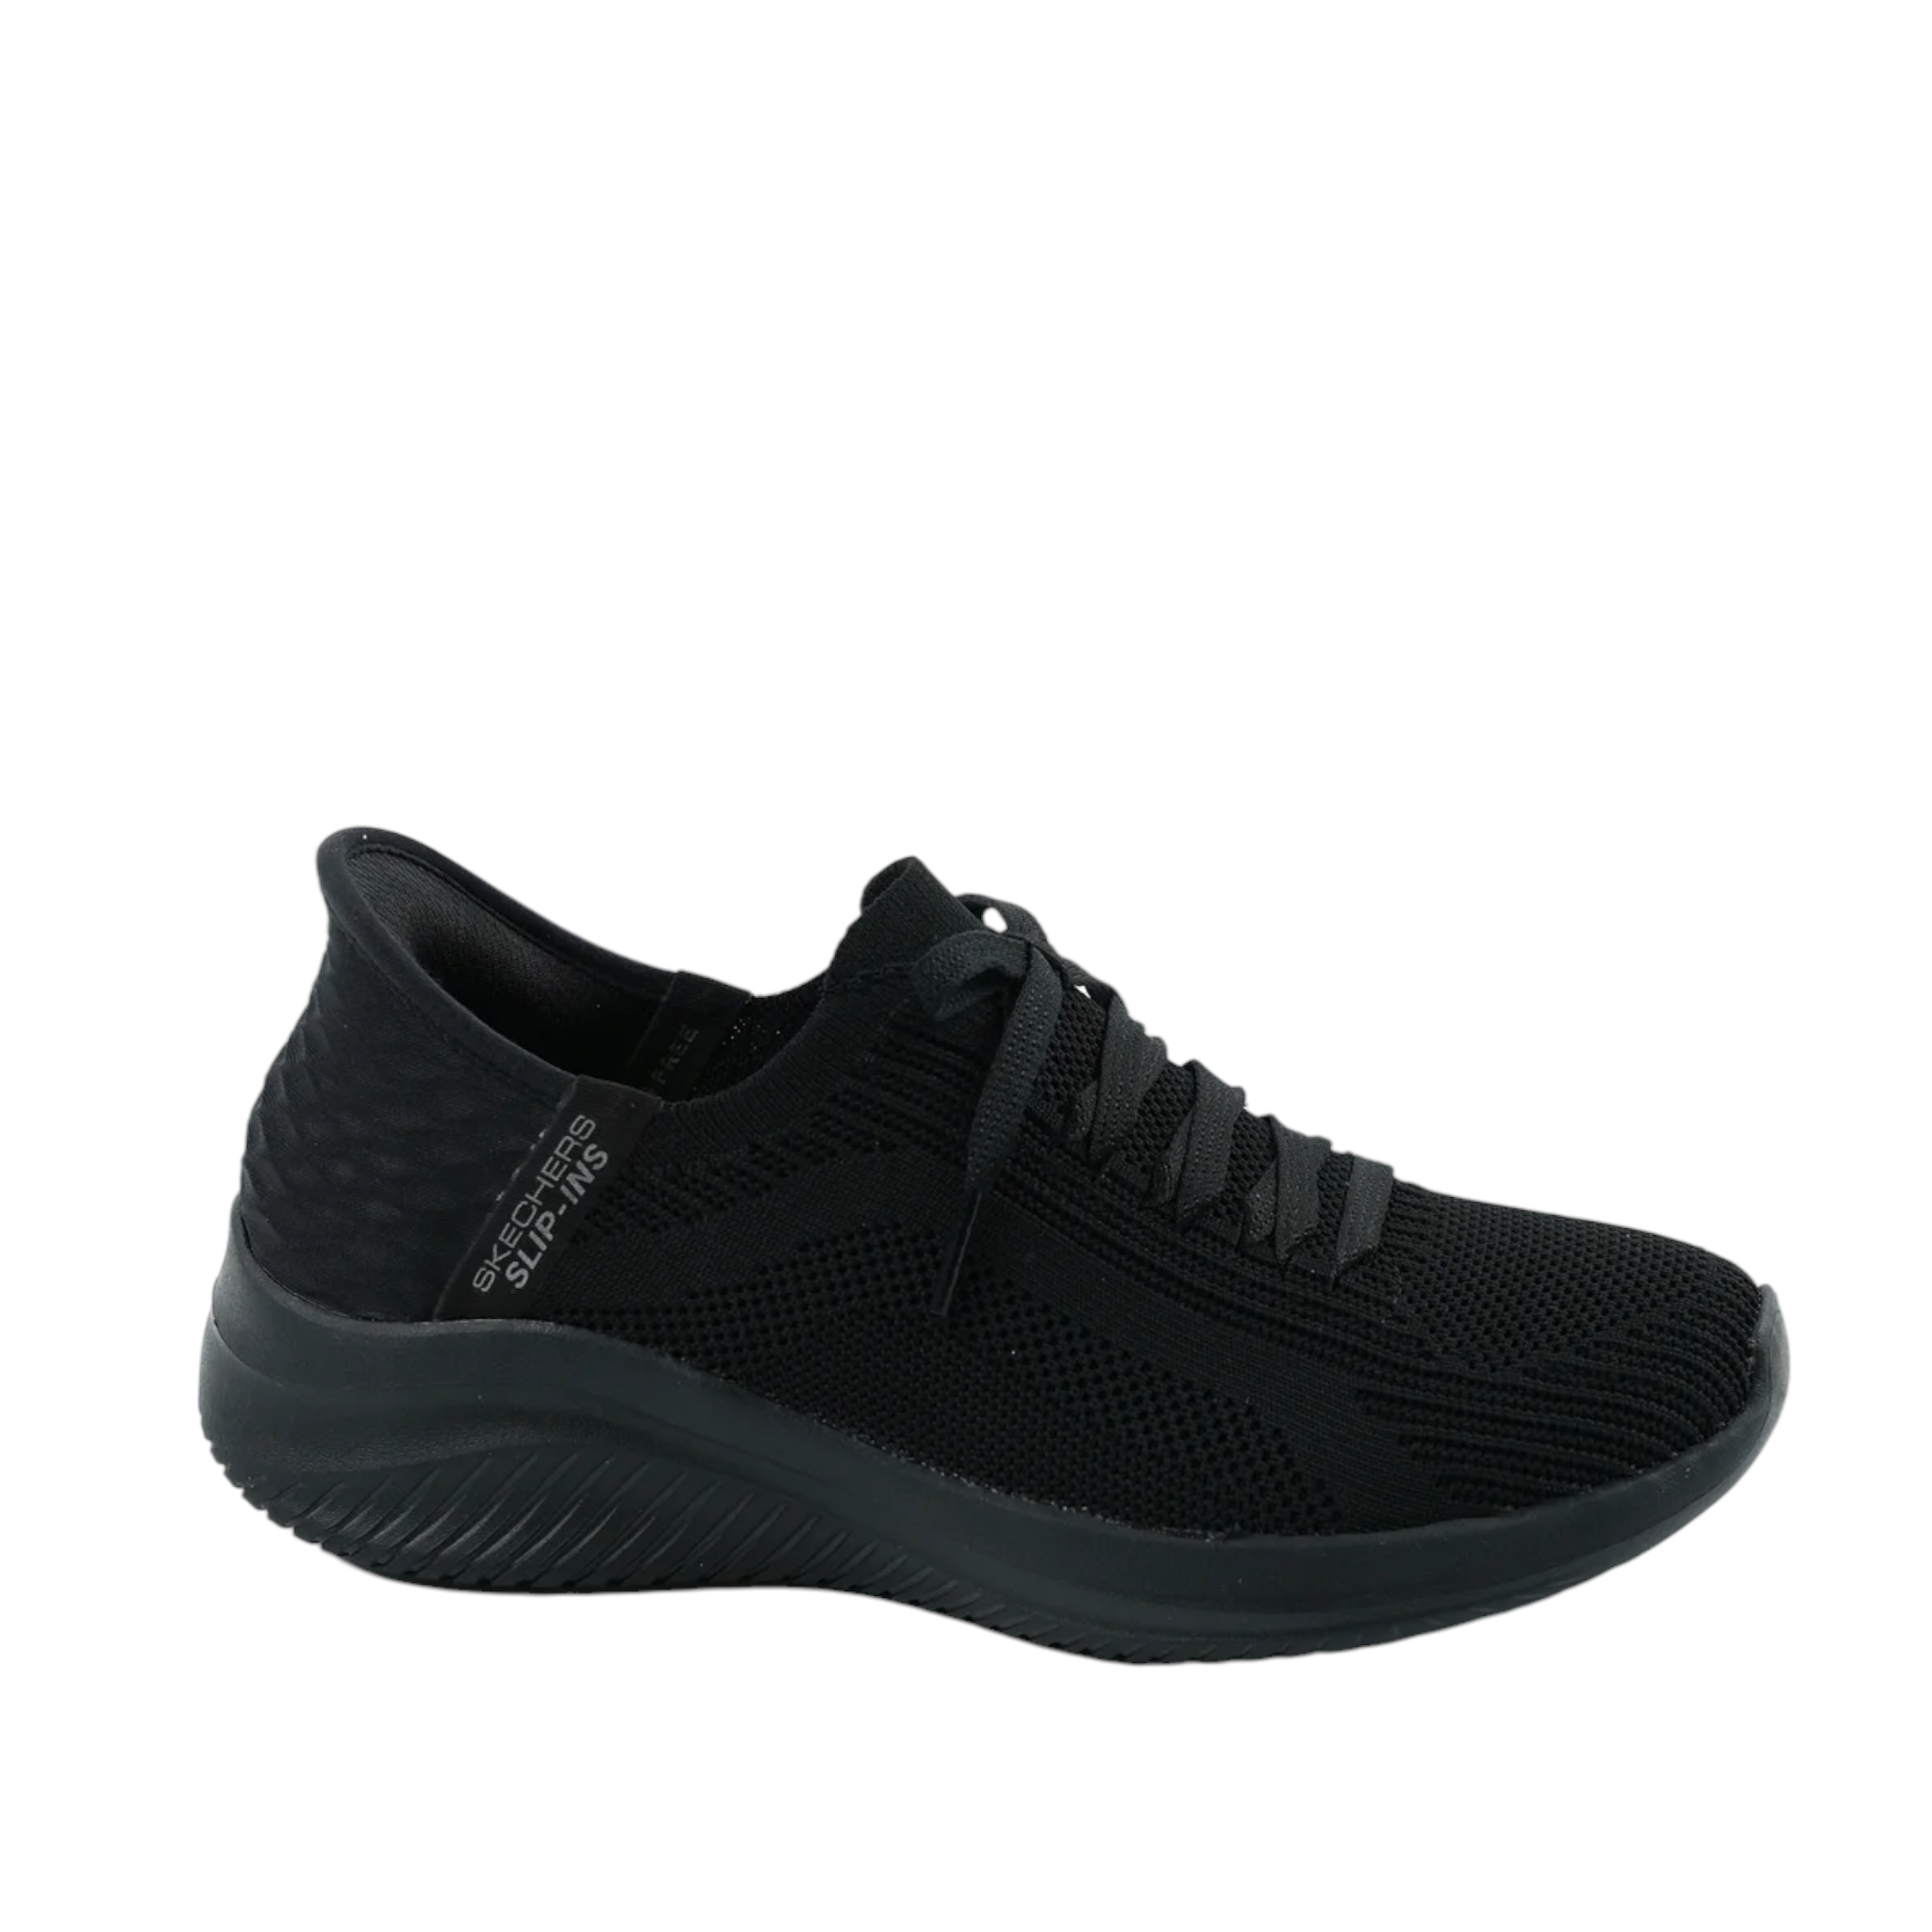 Shop Brilliant Path Skechers - with shoe&amp;me - from Skechers - Sneakers - Sneaker, Winter, Womens - [collection]